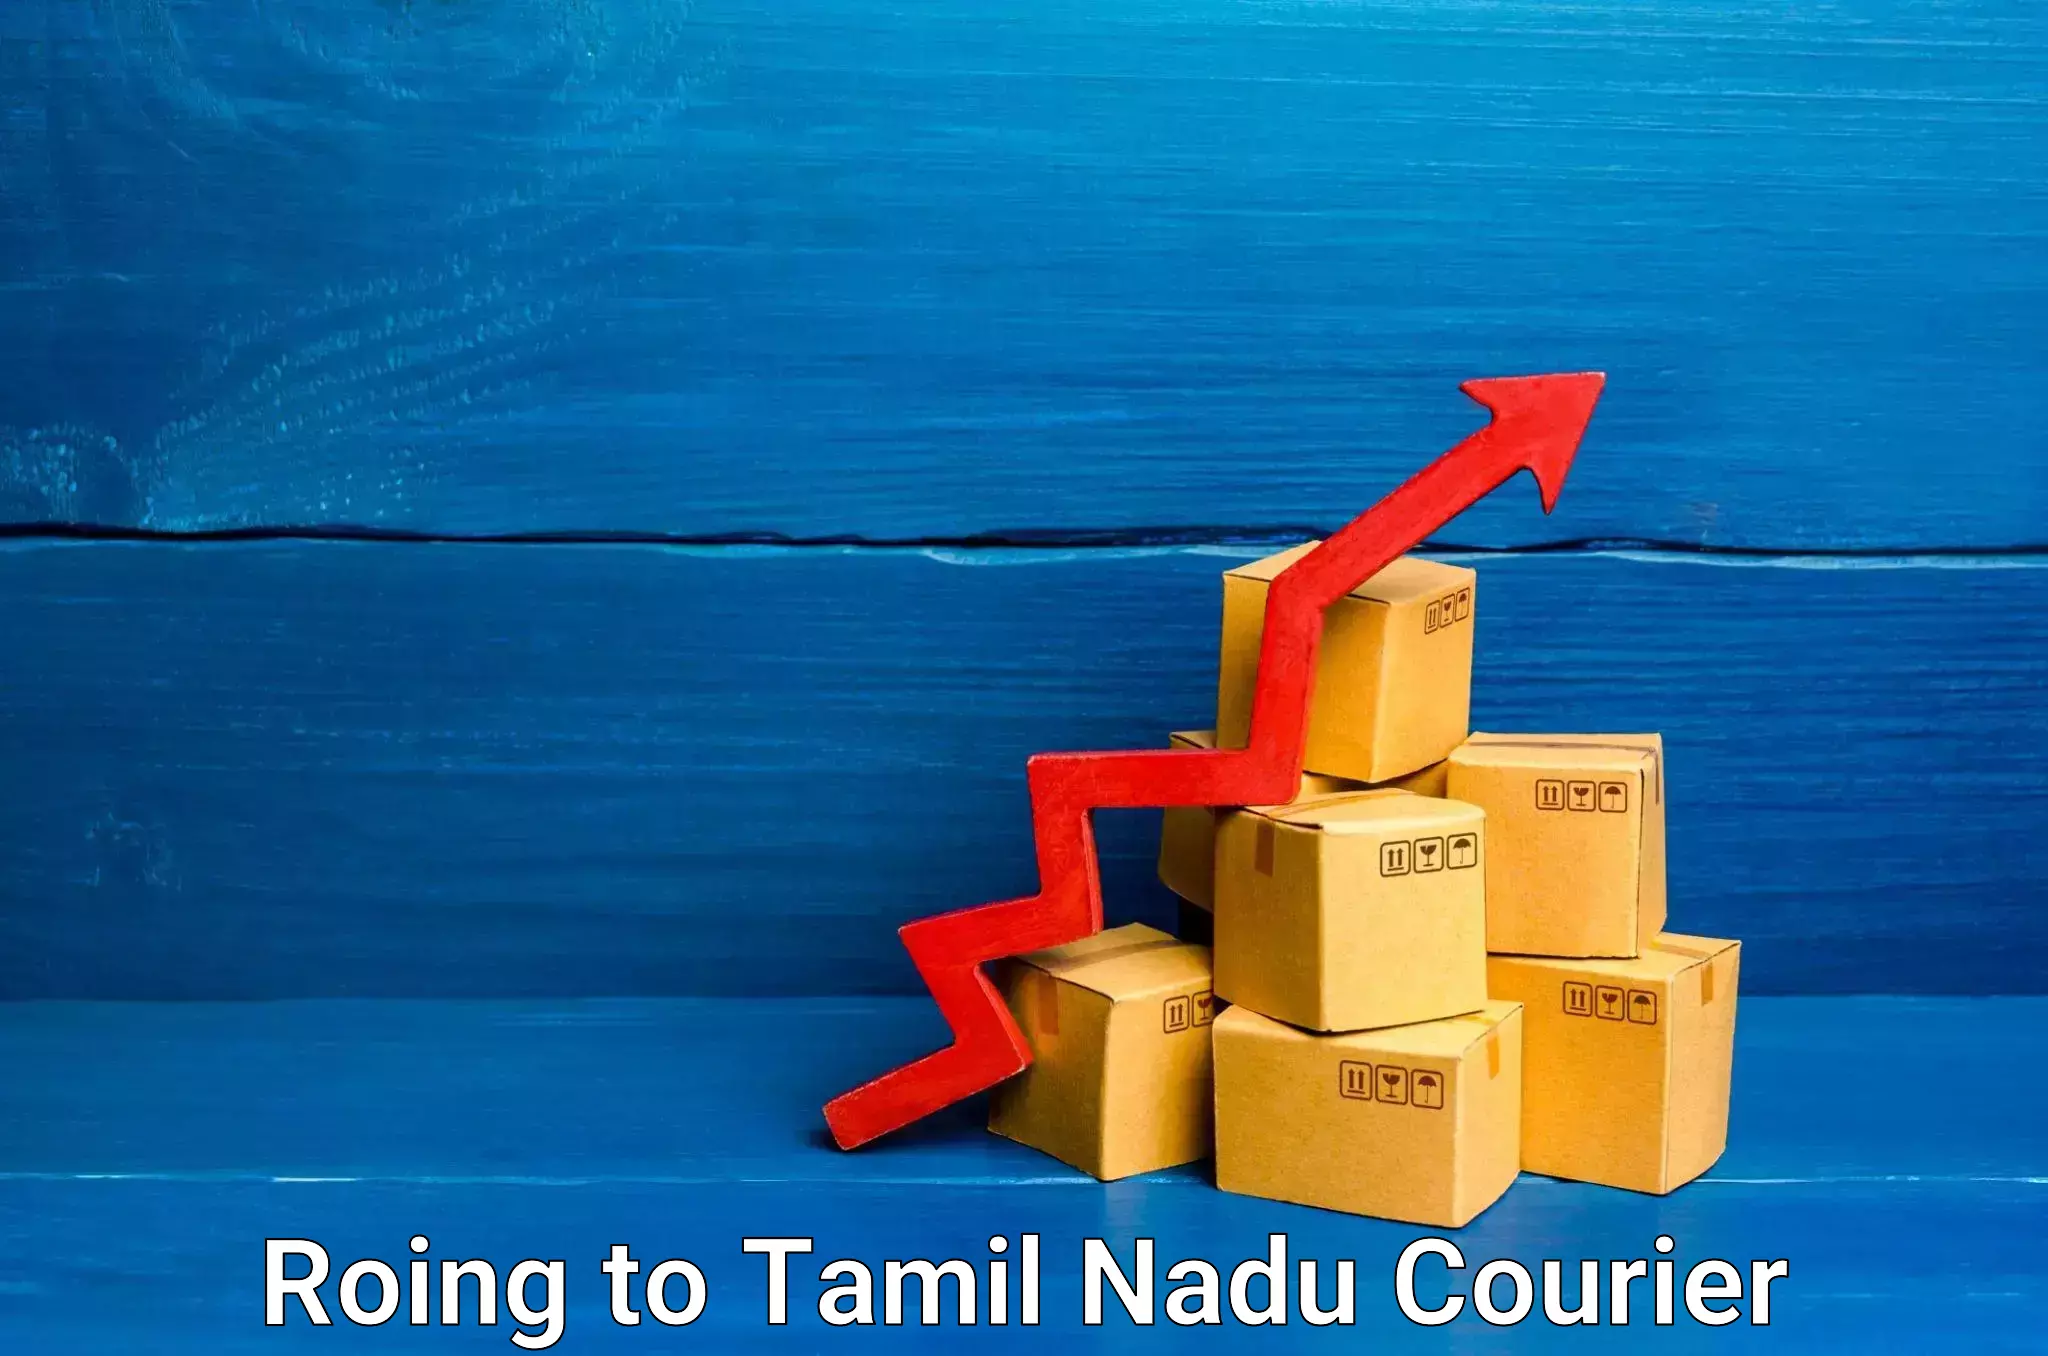 Premium delivery services Roing to Chennai Port